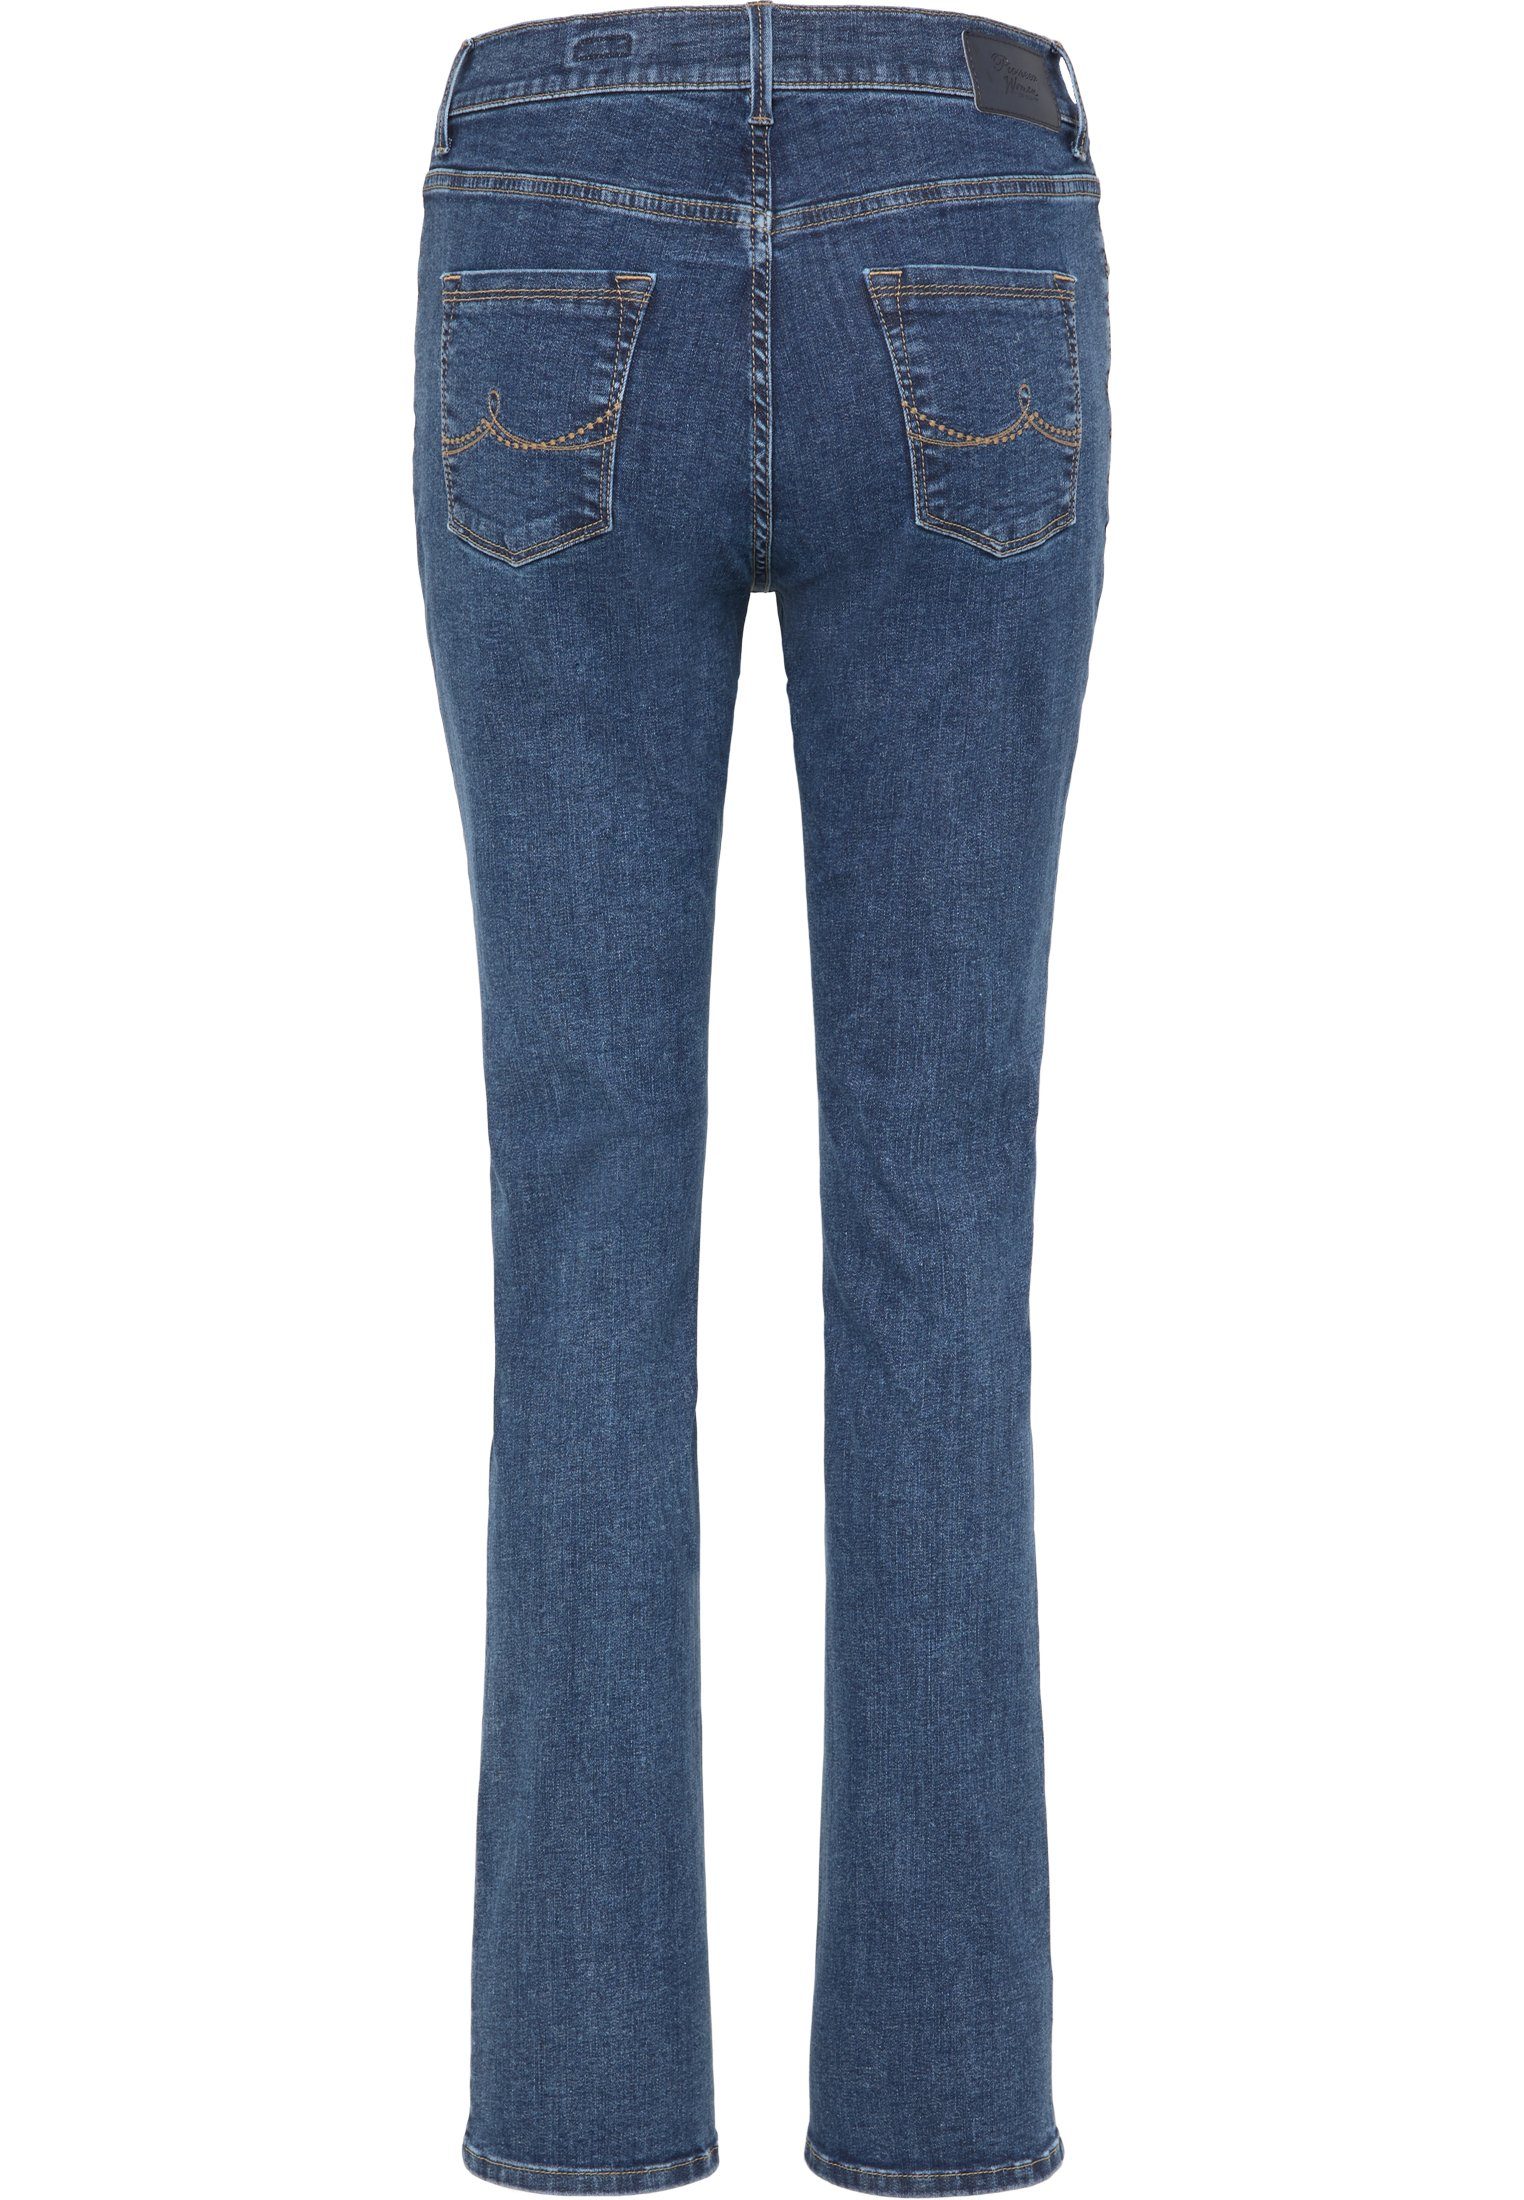 4010.05 Jeans POWERSTRETCH blue Authentic - PIONEER 3213 Pioneer mid KATE Stretch-Jeans